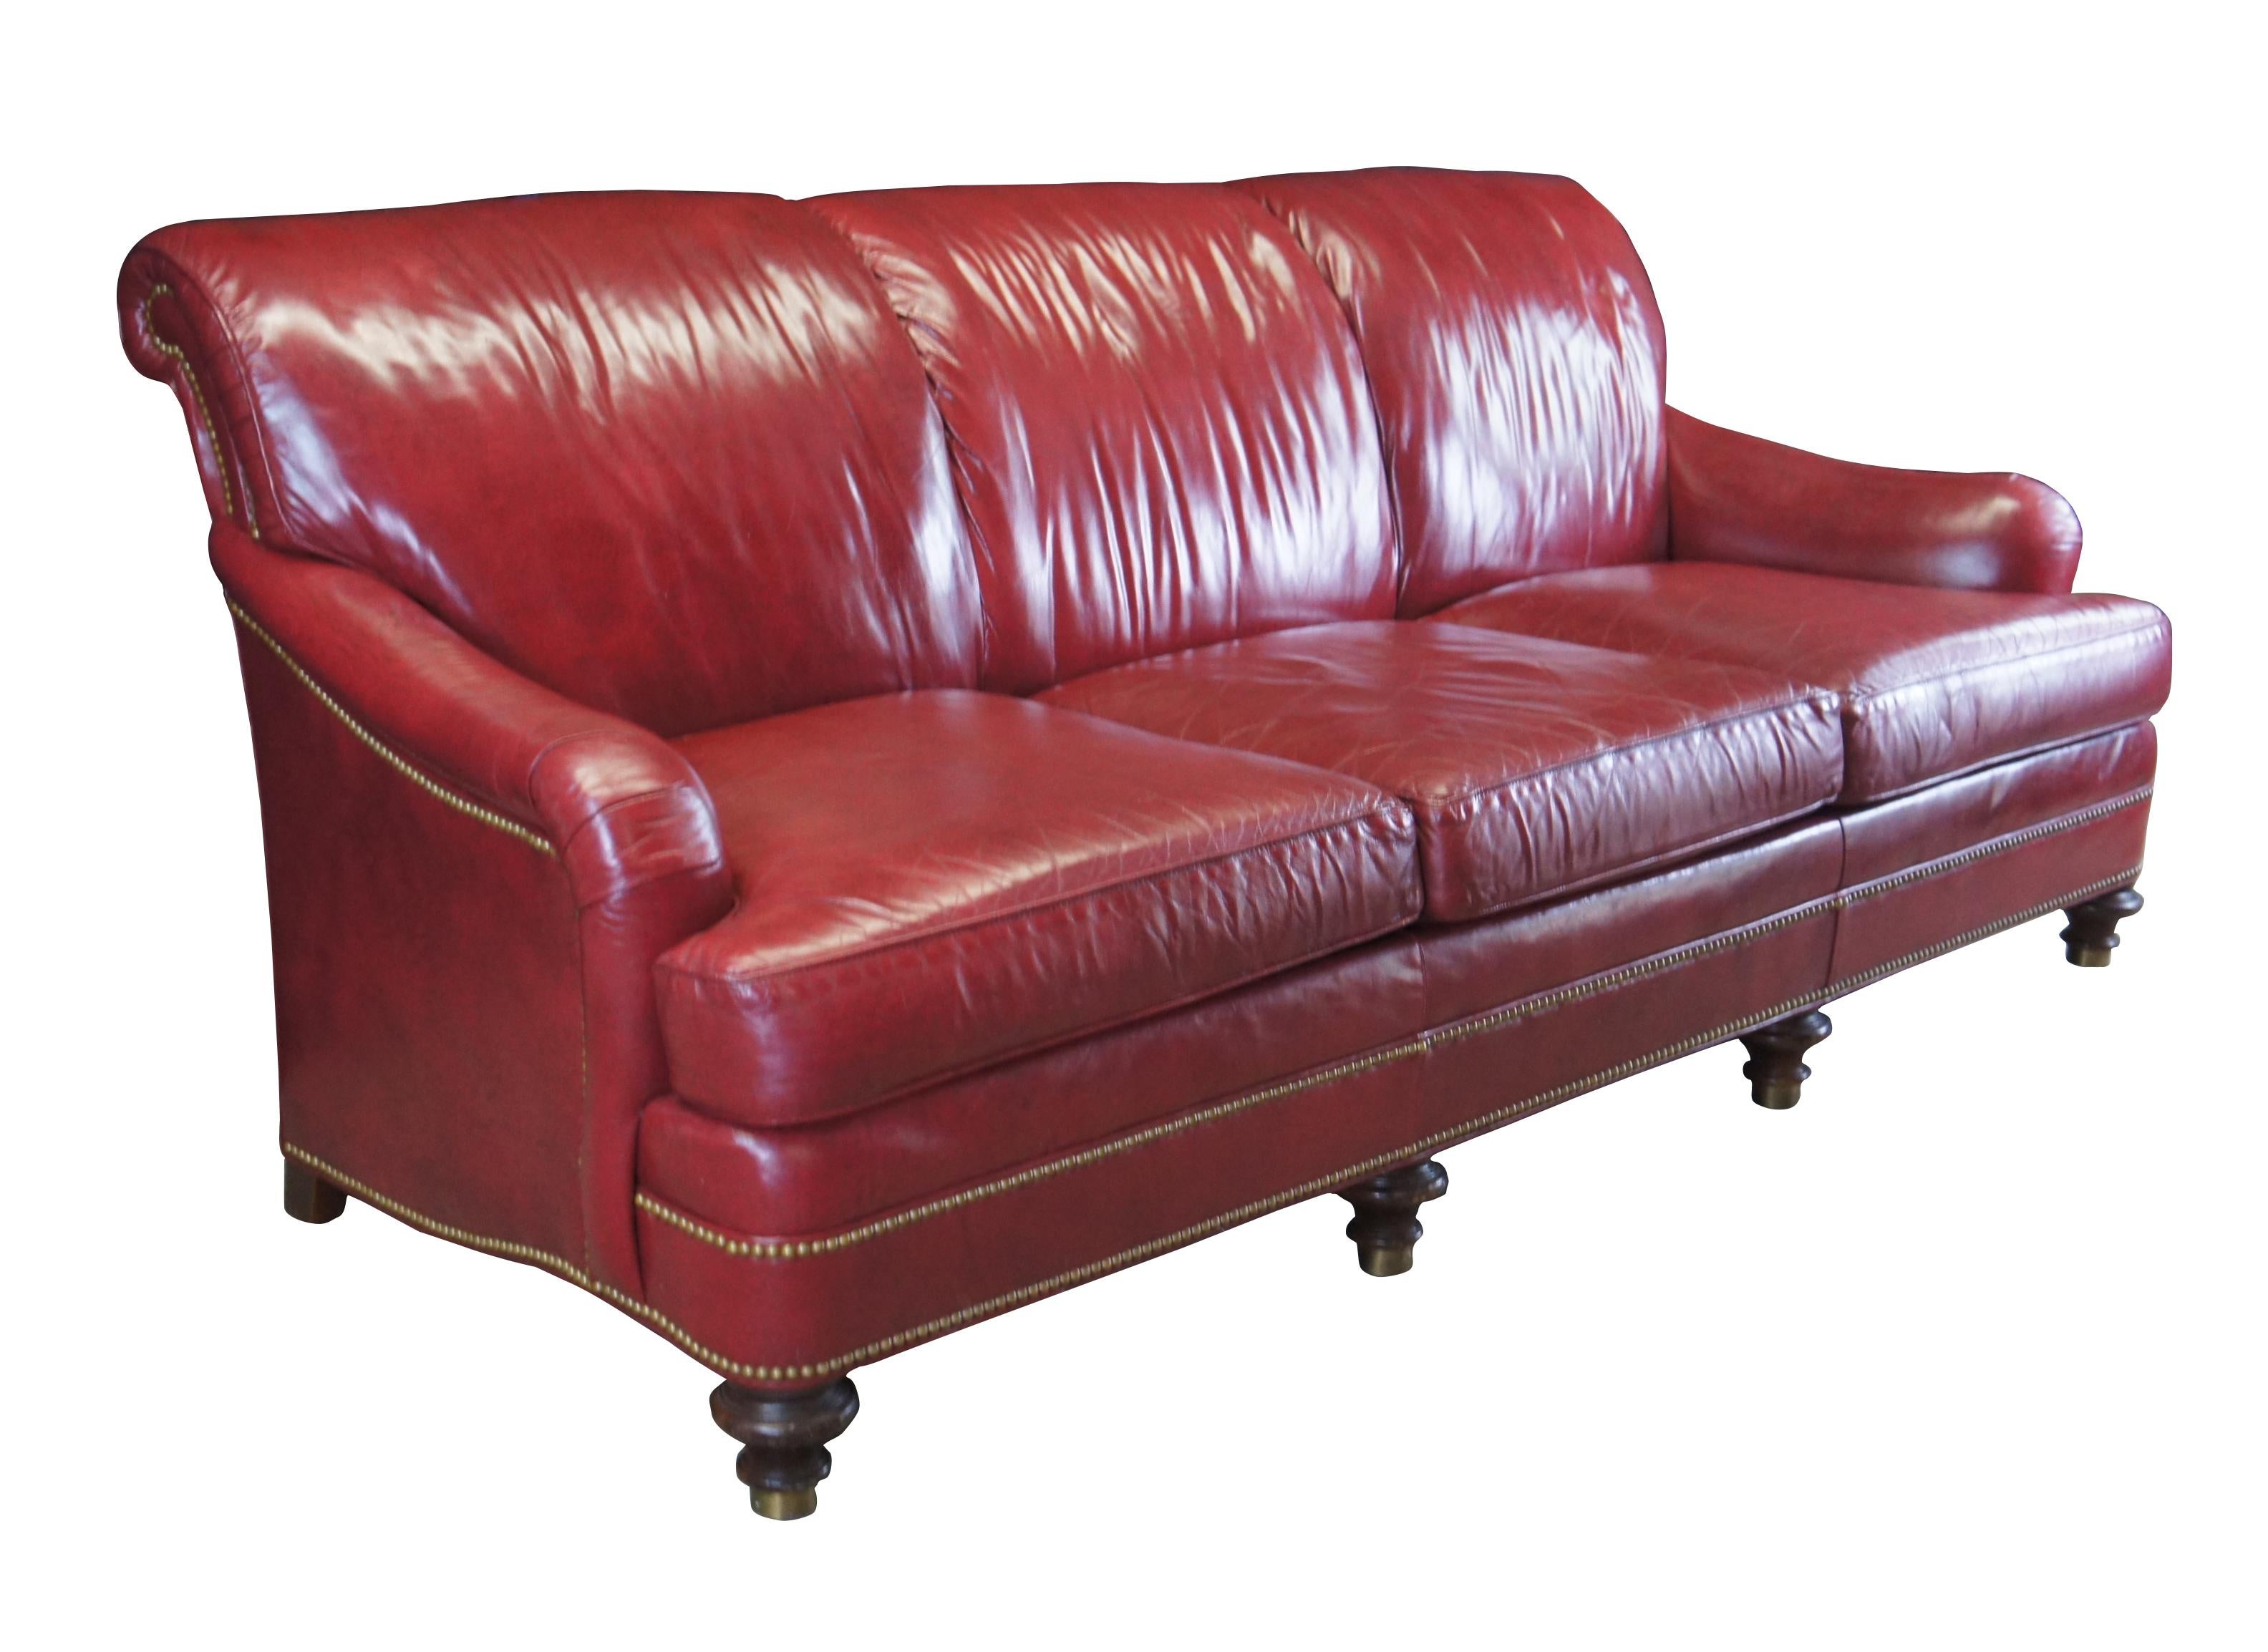 A regal Hancock & Moore Sofa, circa last quarter 20th century. Features a slope arm and scrolled back.  Upholstered in a rich red leather with brass nail head trim.  The sofa is supported by turned mahogany bun feet with brass